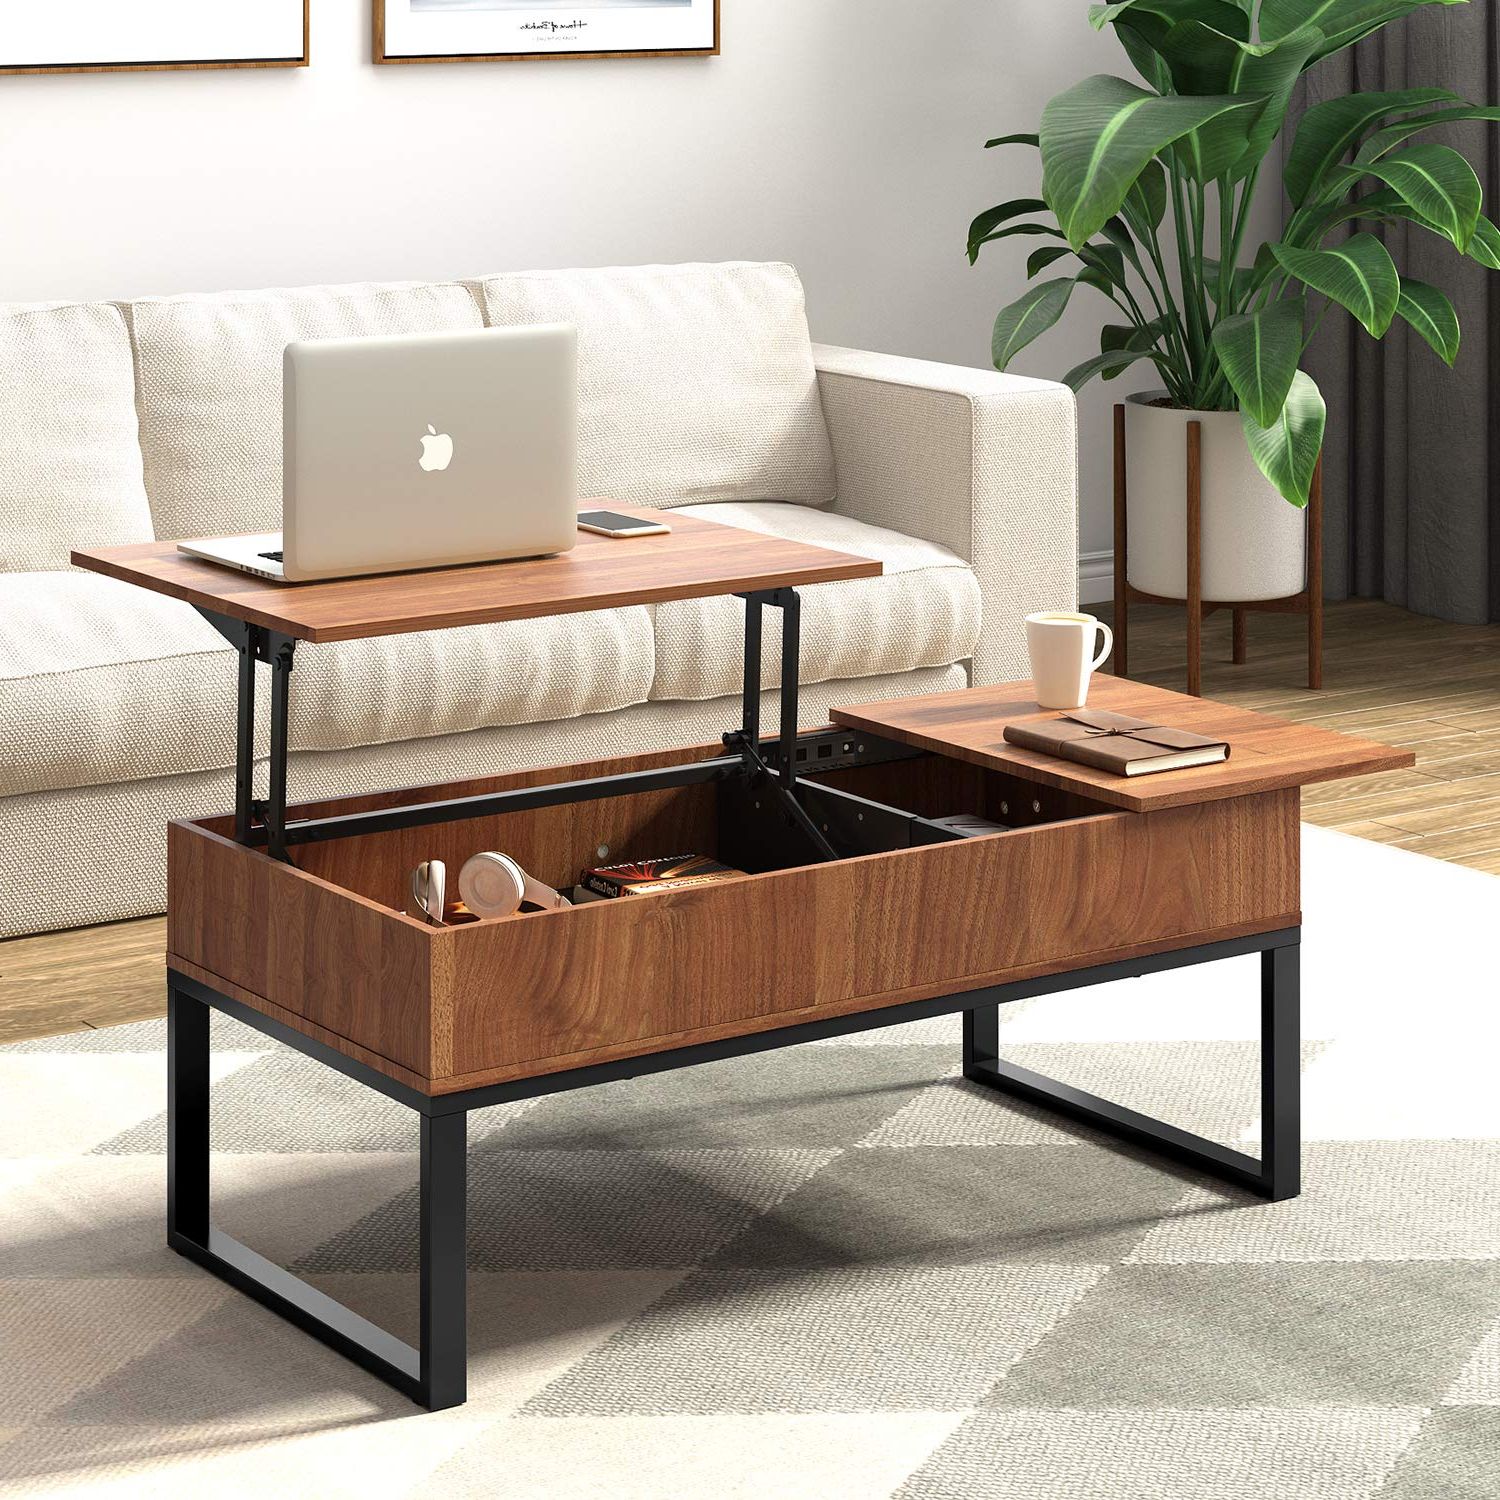 Modern Wooden Lift Top Tables Within Best And Newest Wlive Wood Coffee Table With Adjustable Lift Top Table, Metal Frame (View 6 of 15)